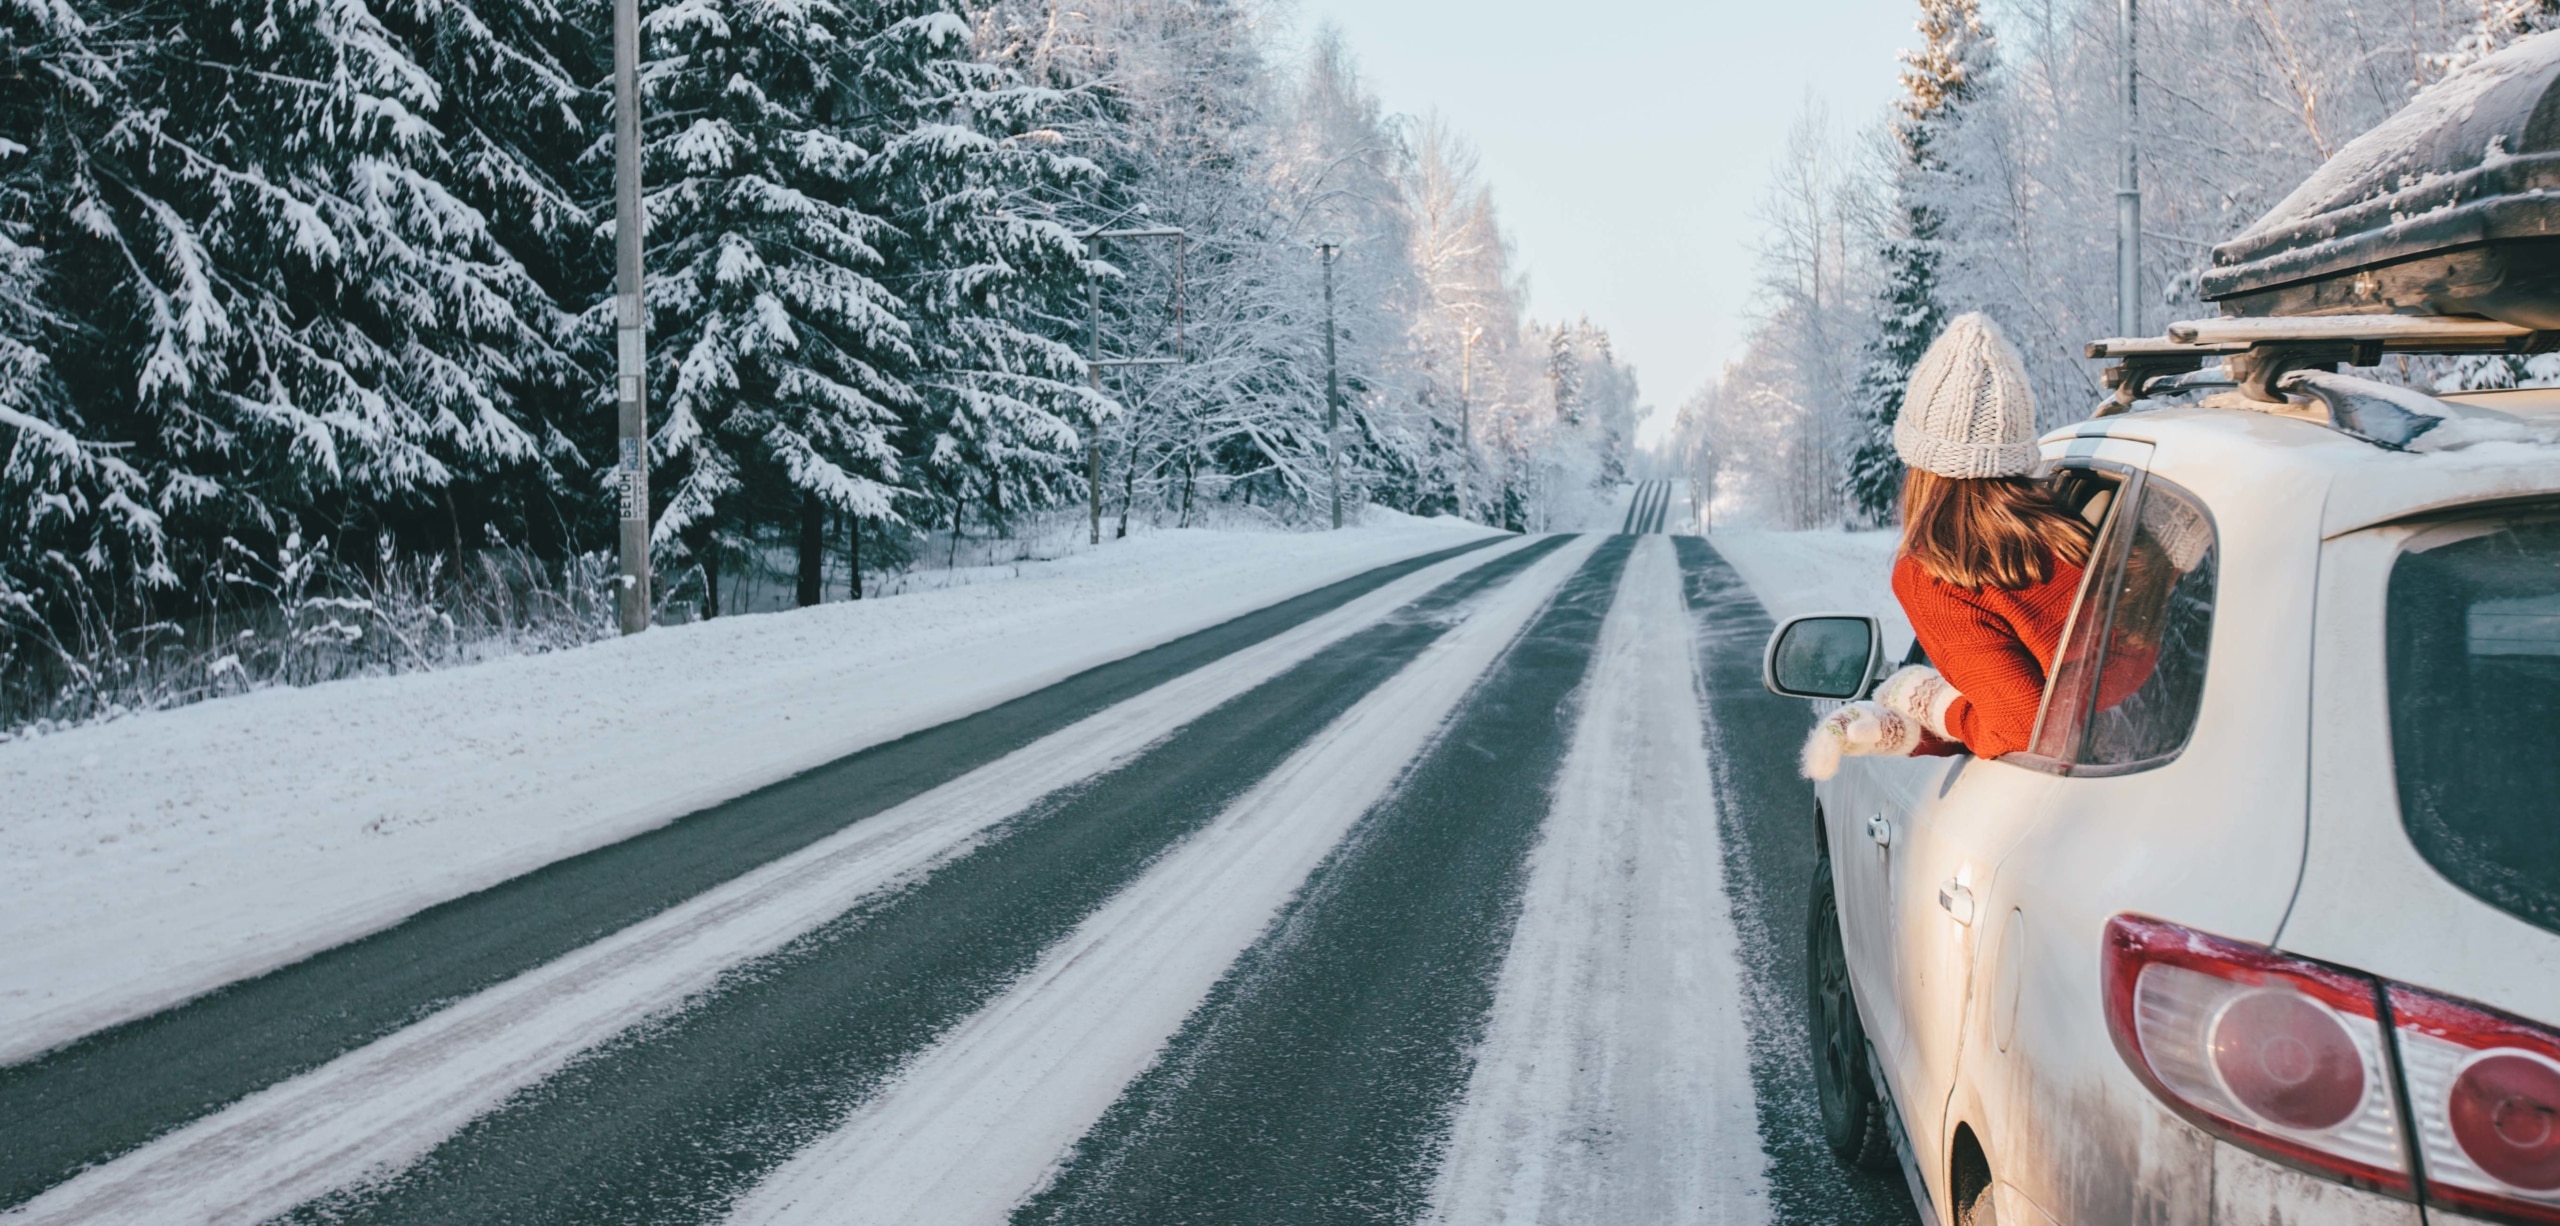 A woman in a knit hat sticks her head out the window on a scenic snowy highway | Get Your Car Holiday Road Trip Ready